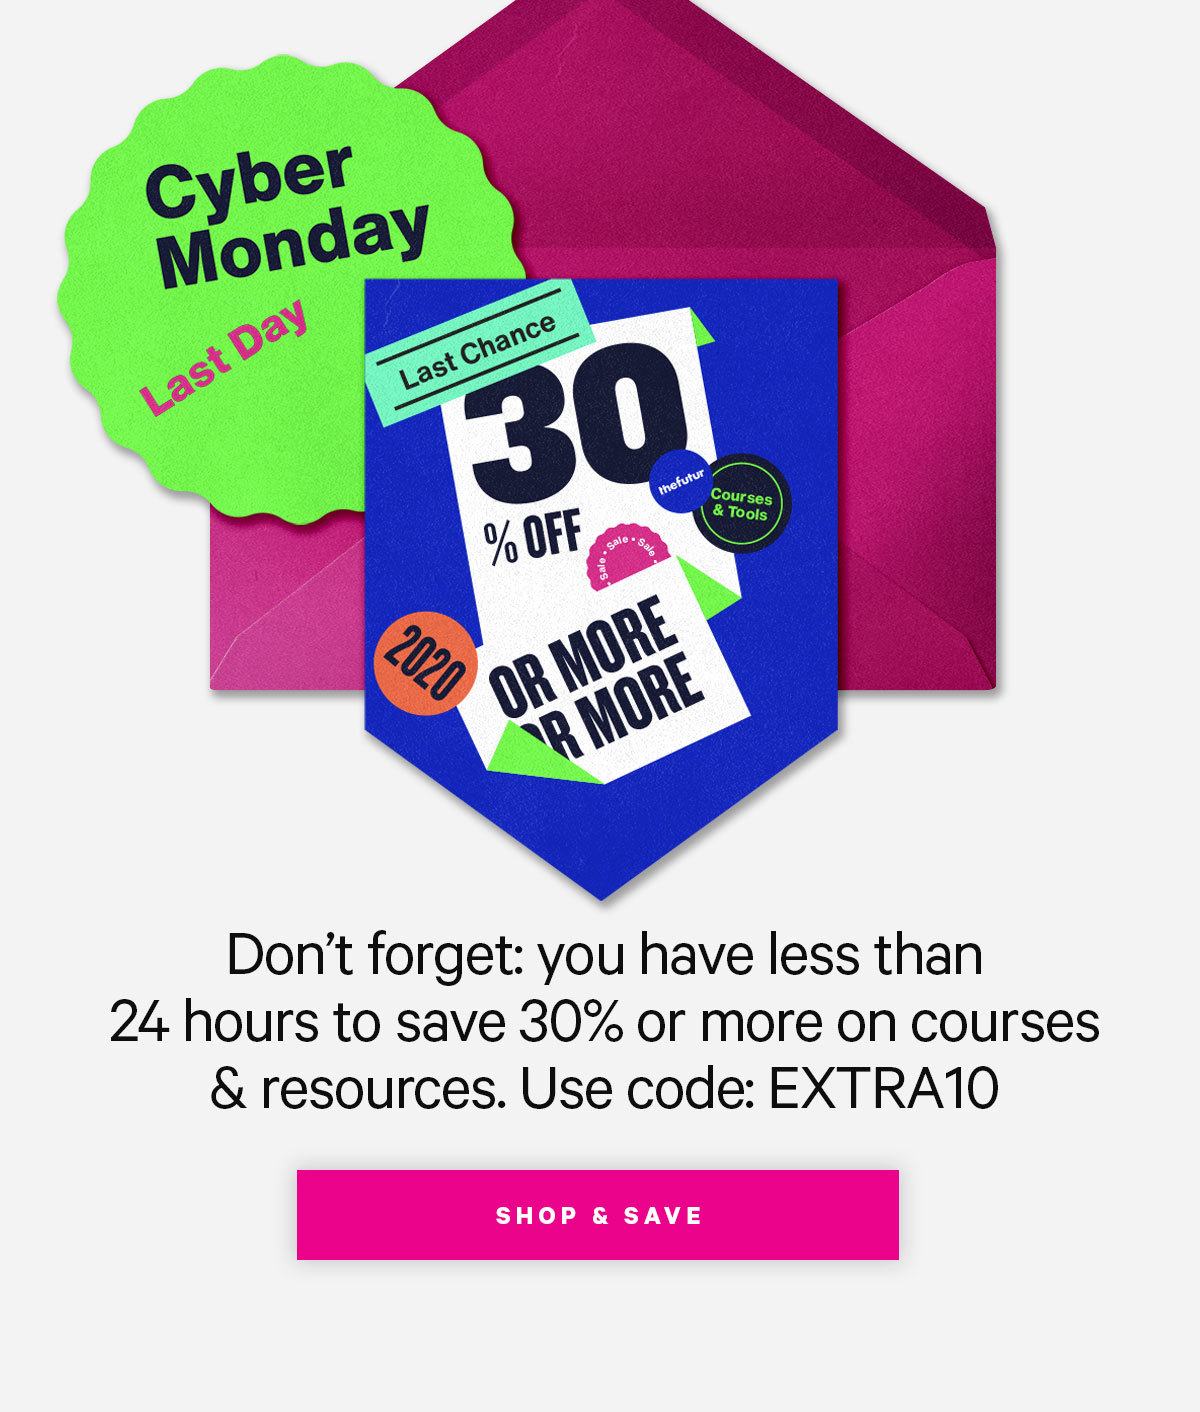 Don't forget: you have less than 24 hours to save 30% or more on courses & resources. Use code: EXTRA10